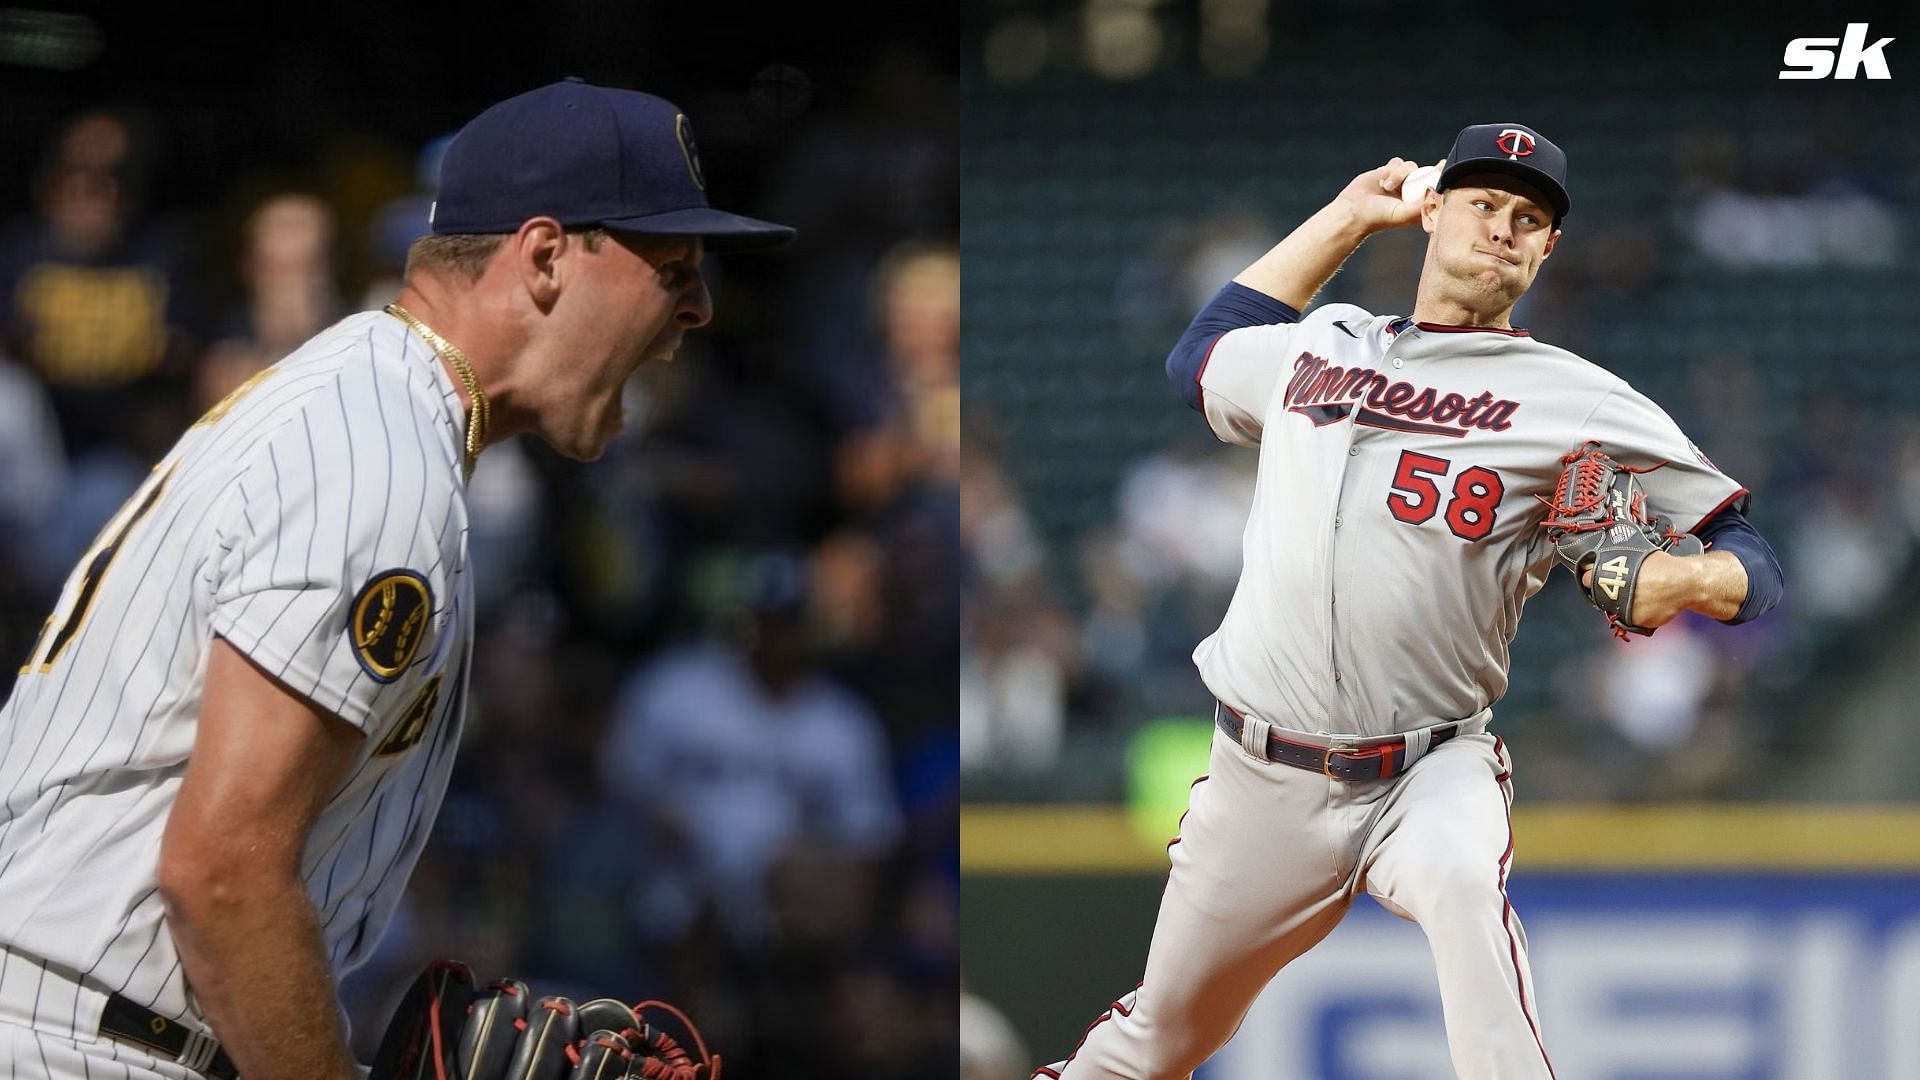 Twins players who have played with the Brewers